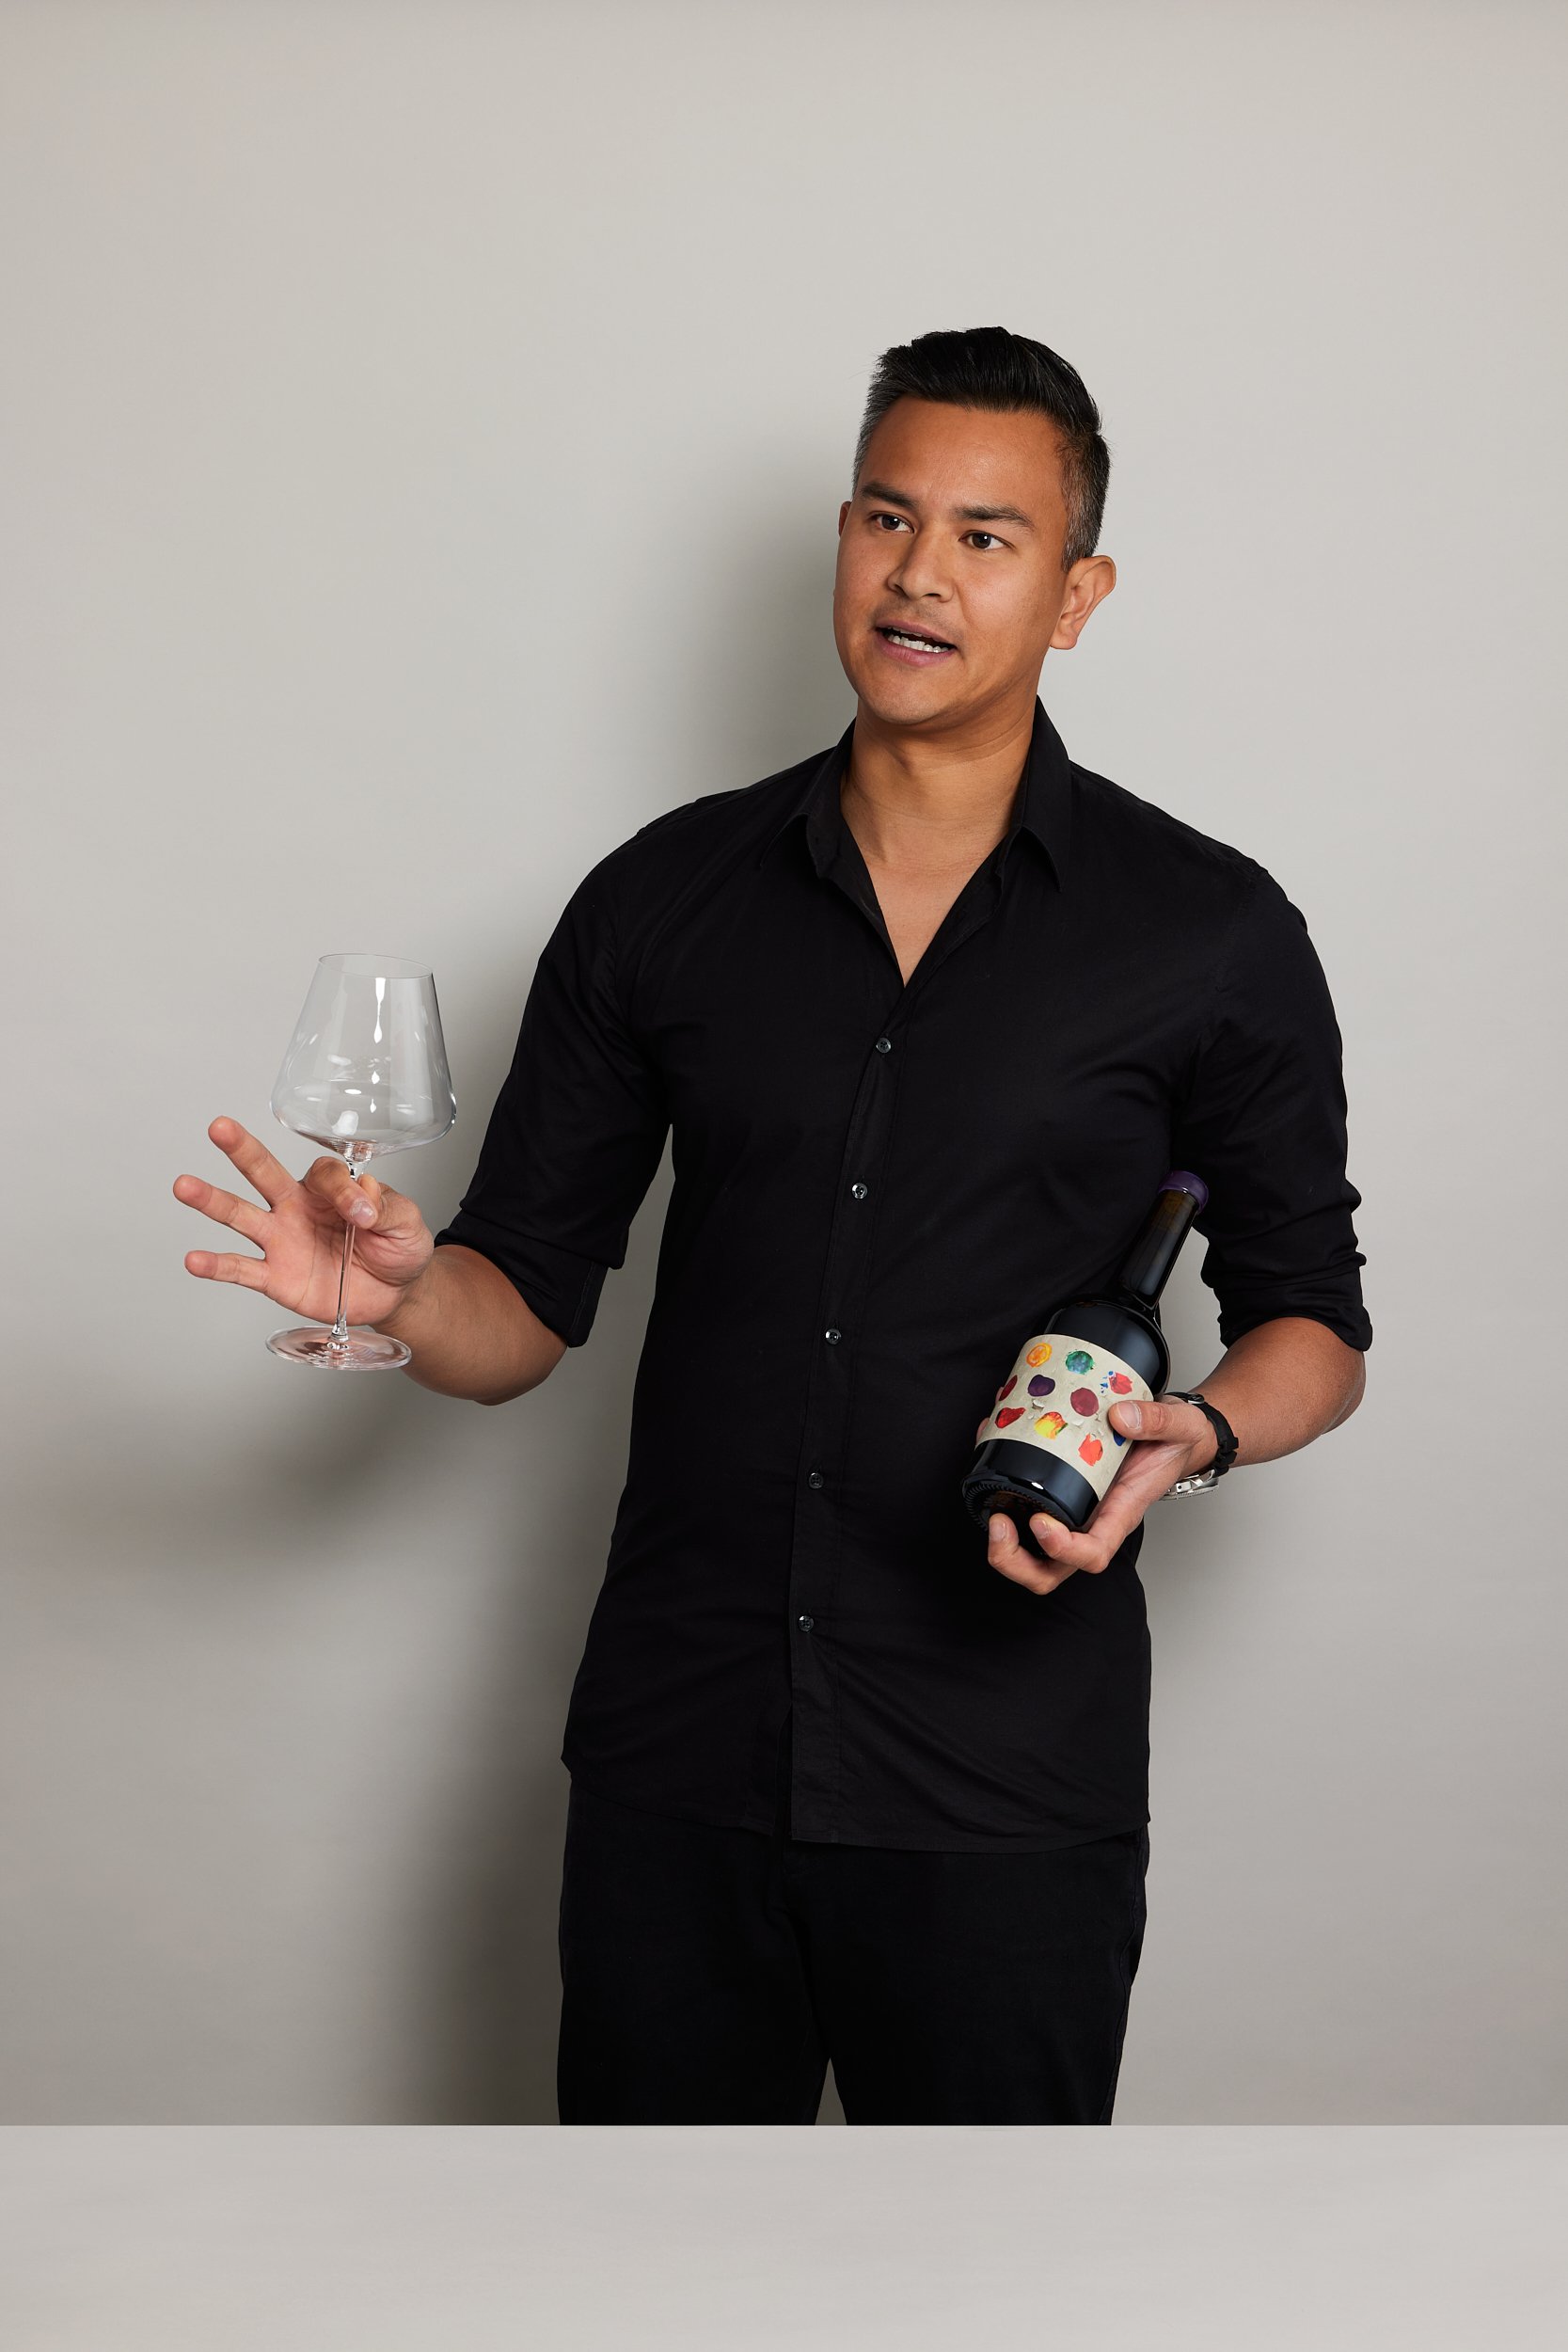 James Dossan of Curated Grapes holding a wine bottle and wine glass talking off camera with photography by Sarah Anderson Photography.jpg